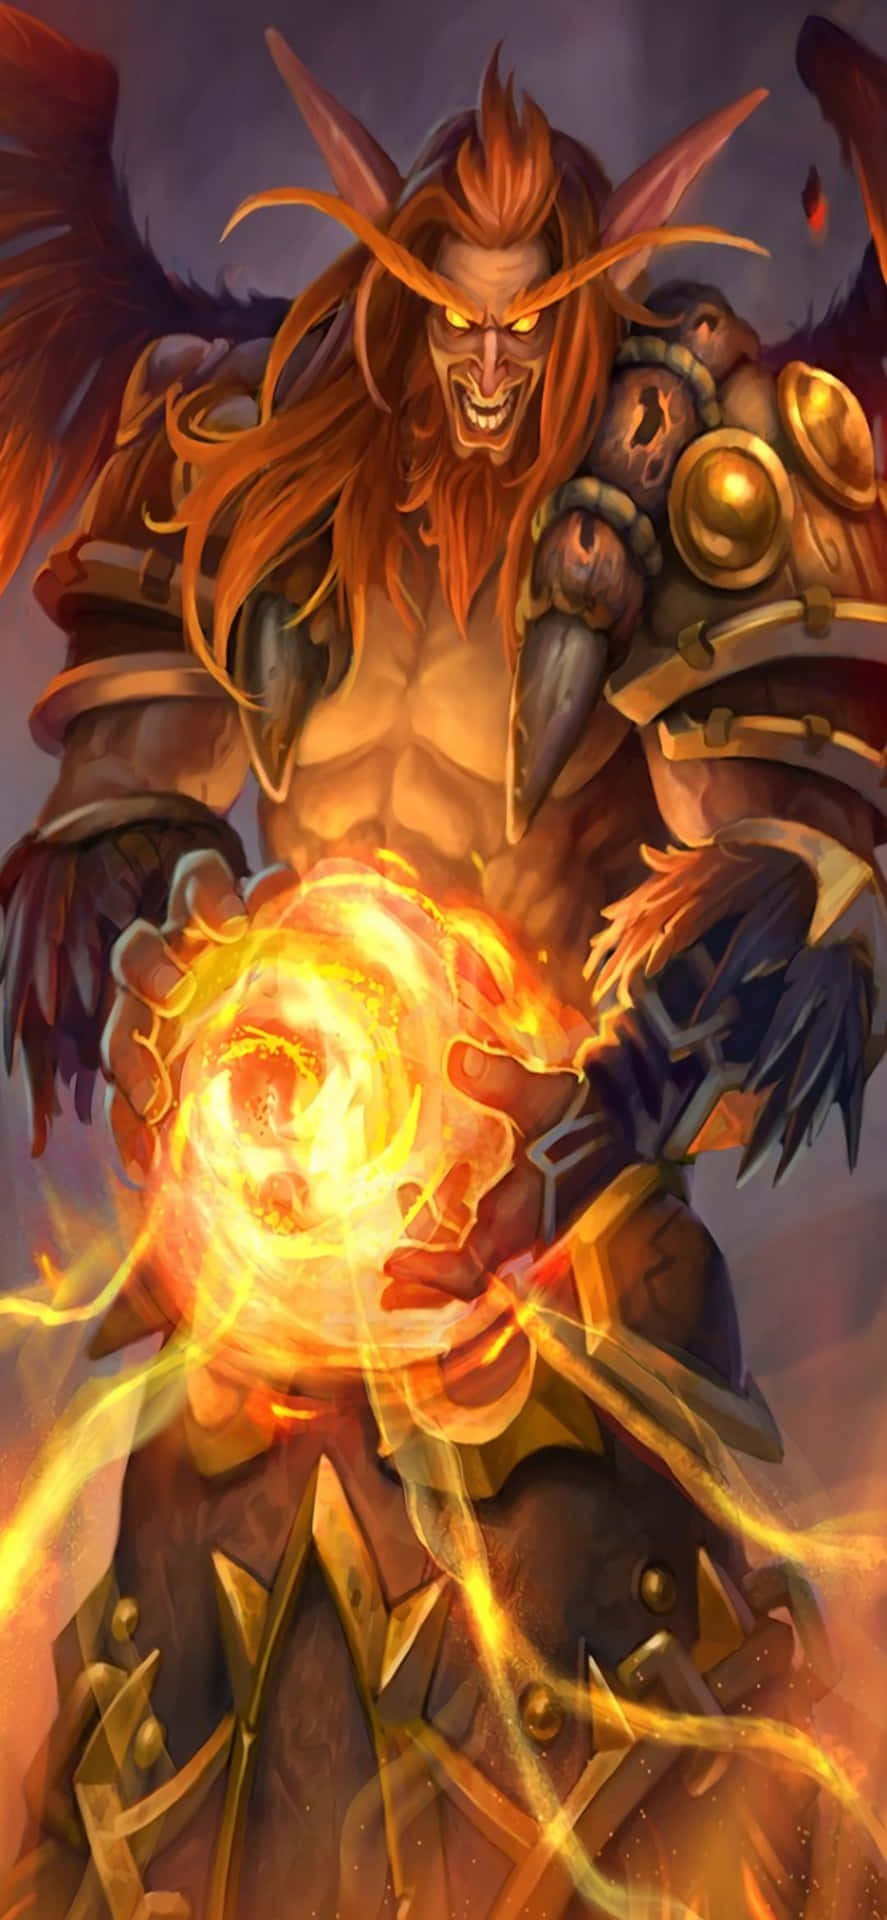 A Character With A Flame In His Hand